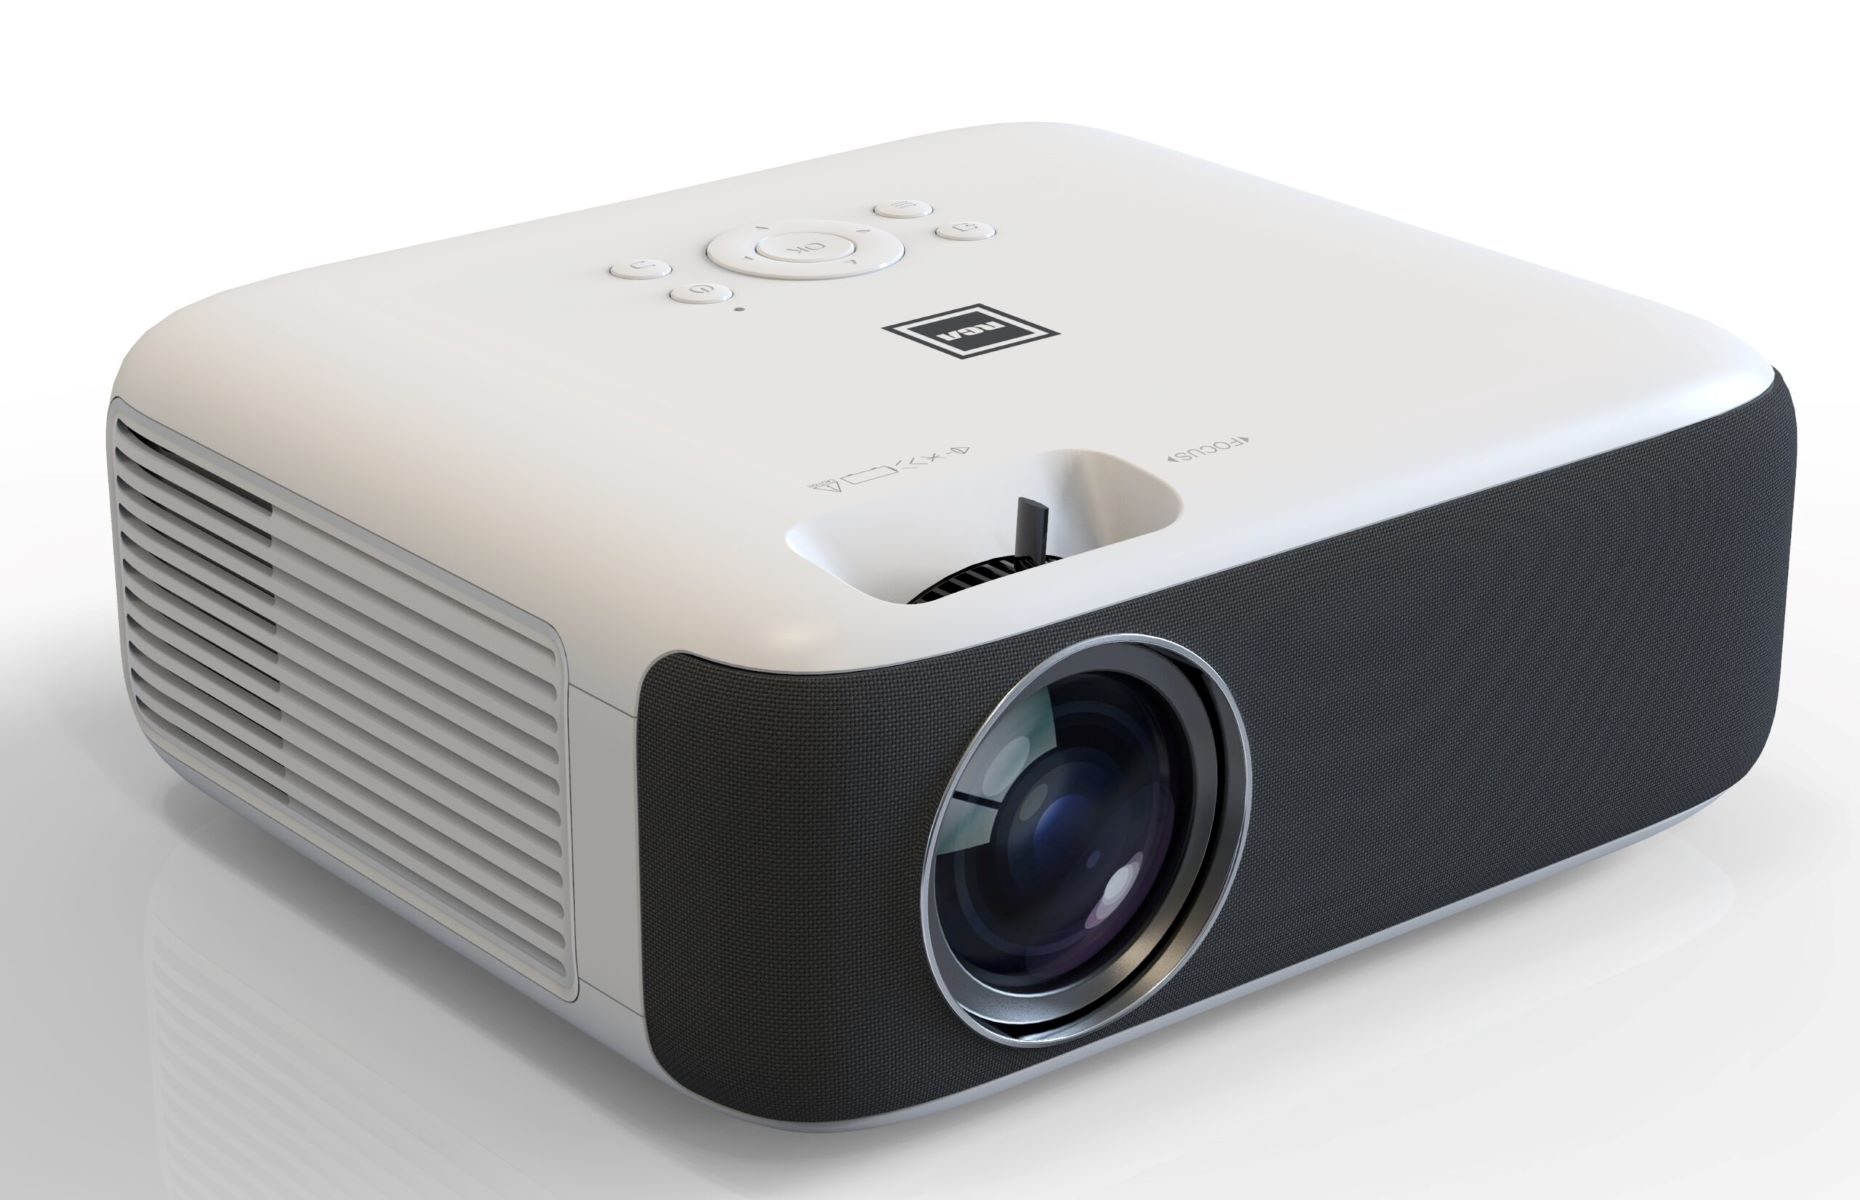 Connecting Your Phone To RCA Projector: Easy Setup Guide